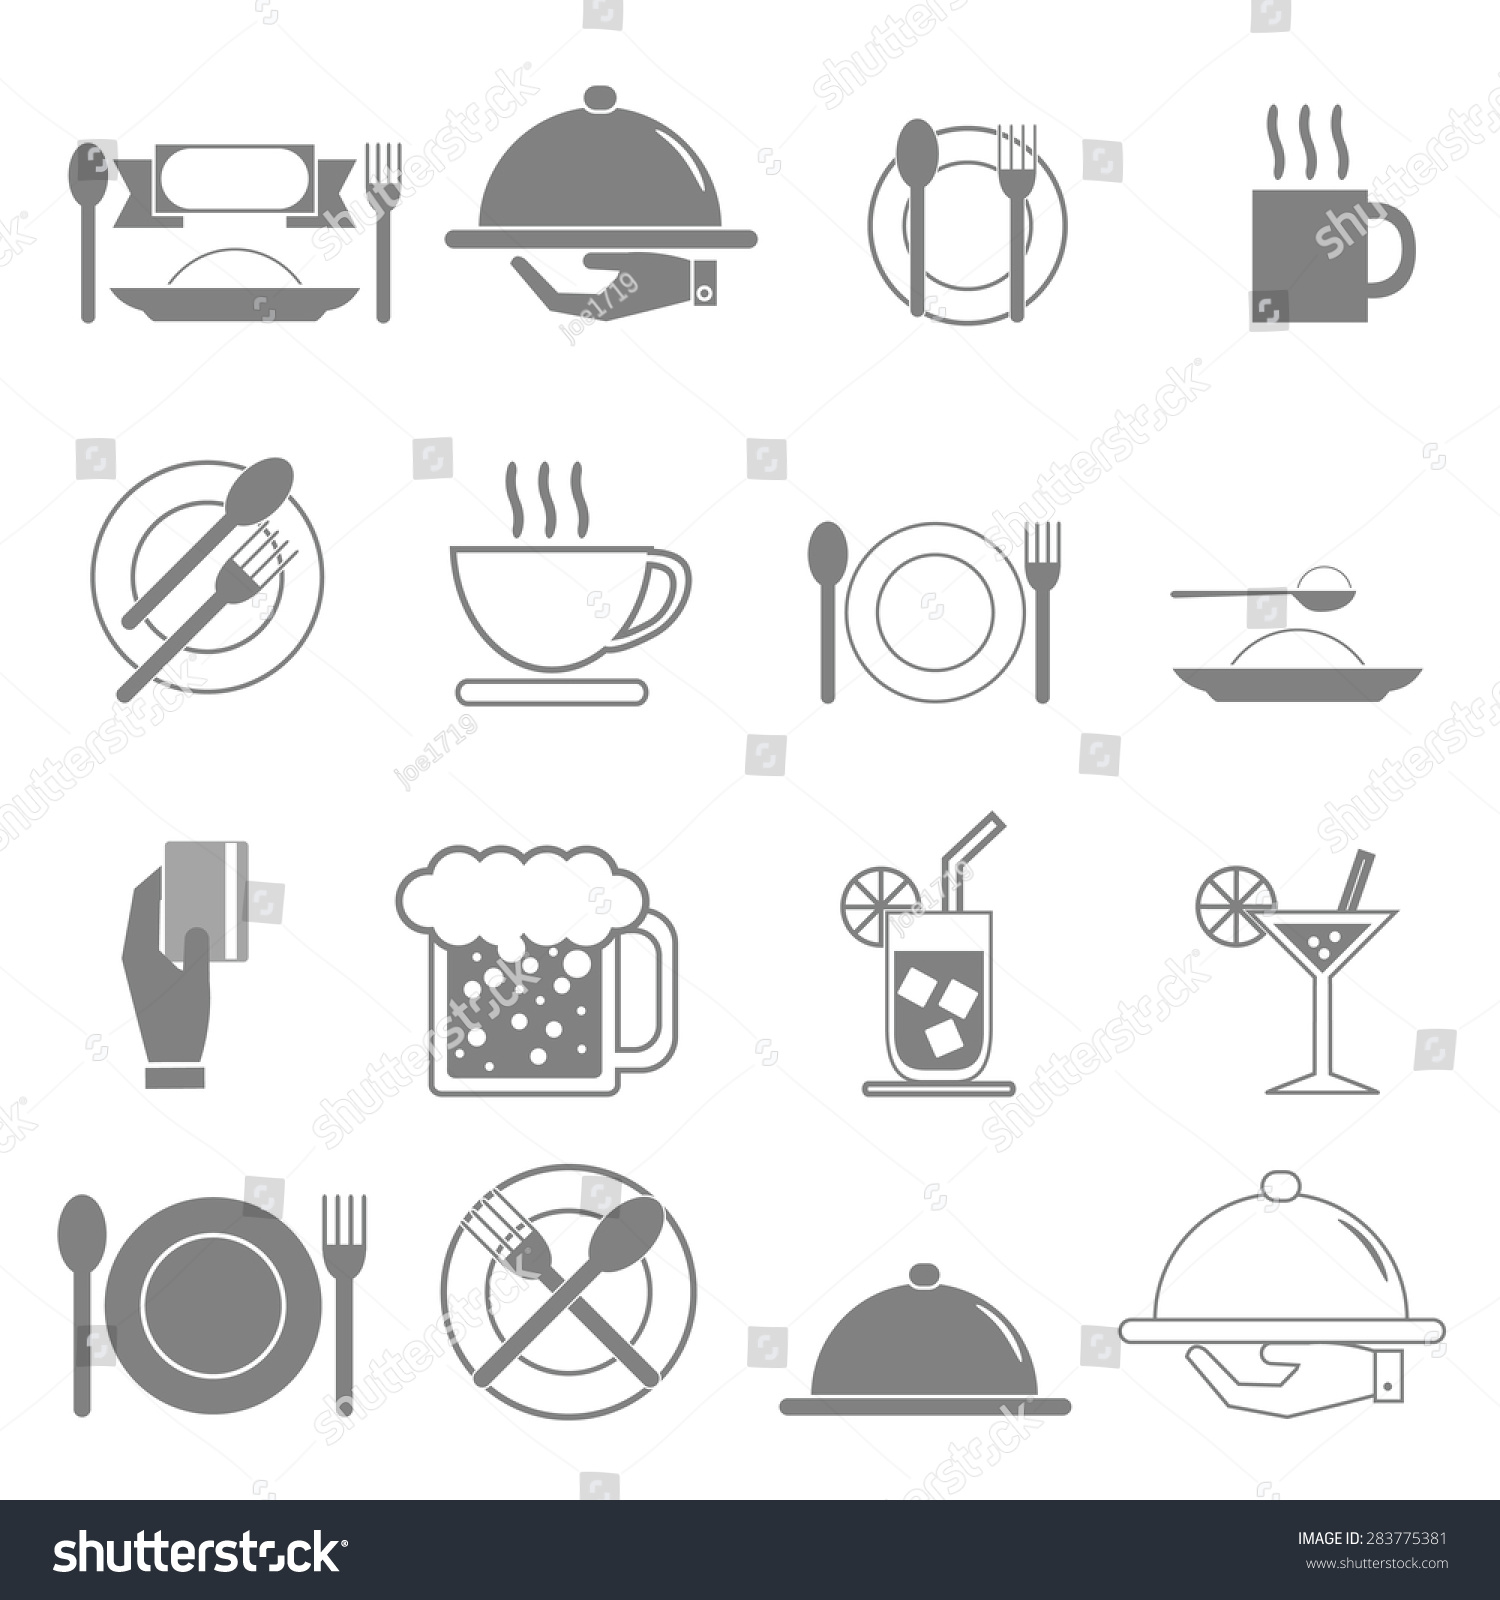 Vector Icon, Food And Beverages. - 283775381 : Shutterstock